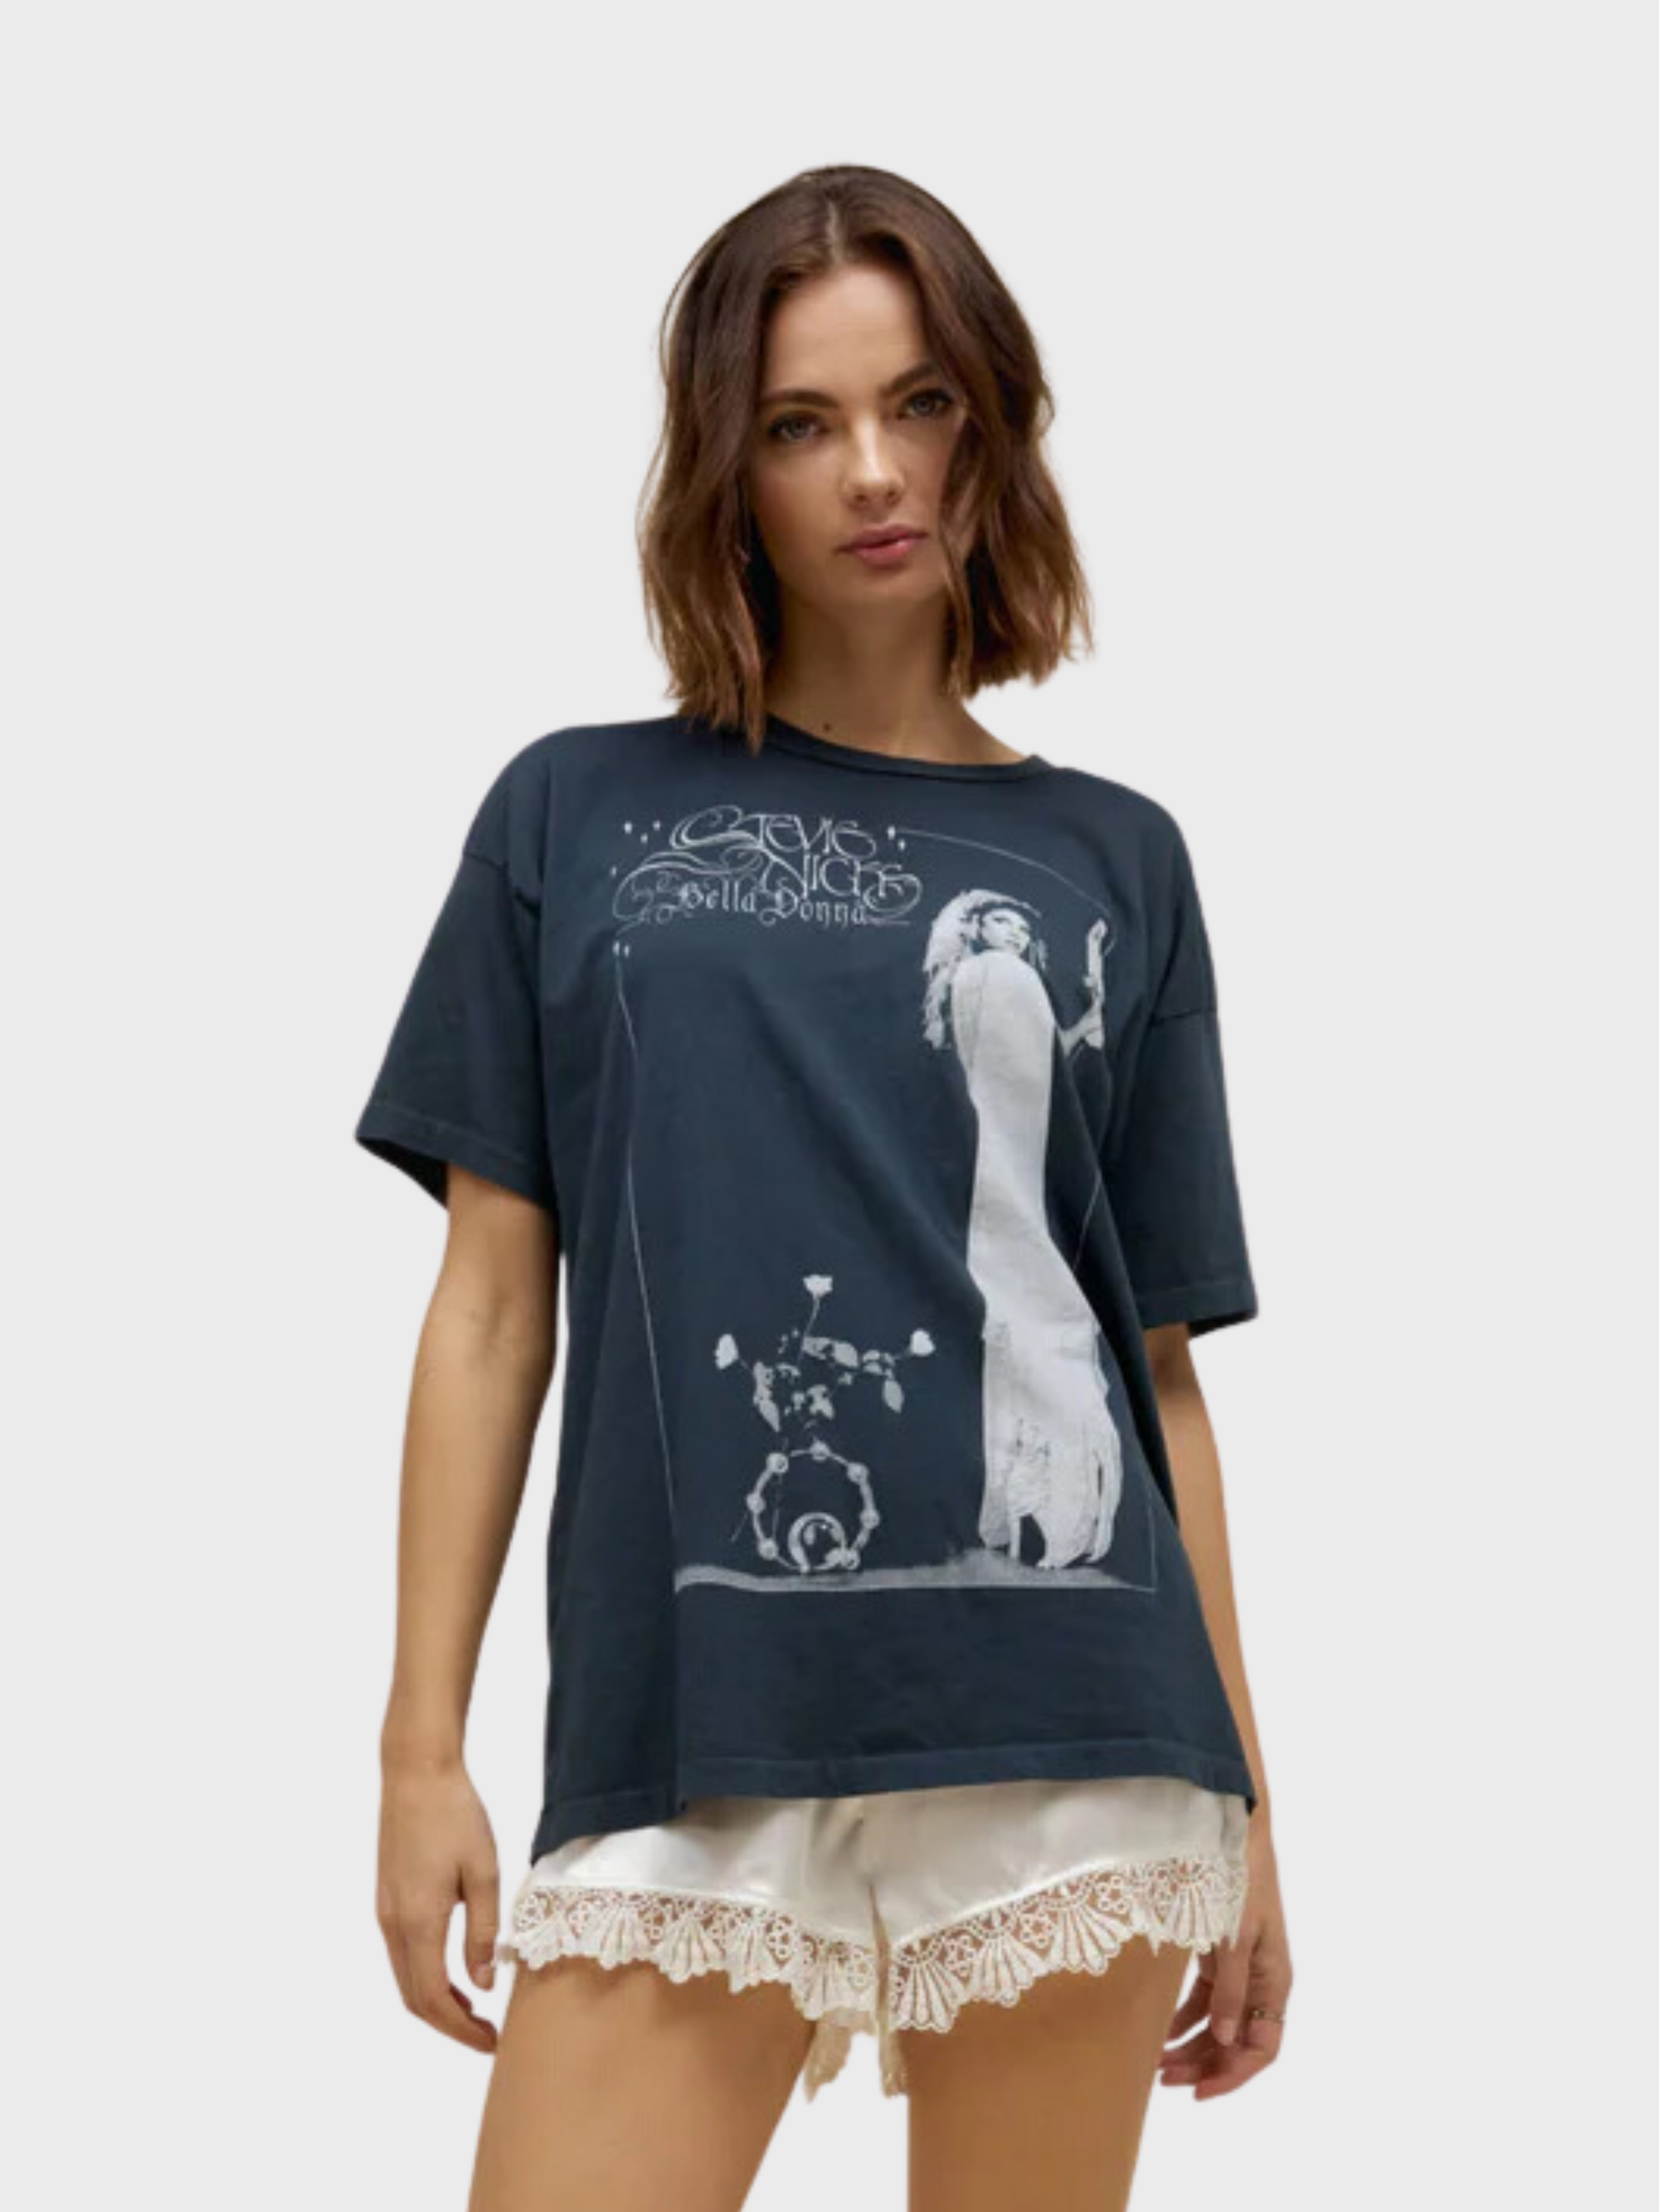 Daydreamer Stevie Nicks Bella Donna Merch Tee Vintage Black-T-Shirts-XS-West of Woodward Boutique-Vancouver-Canada